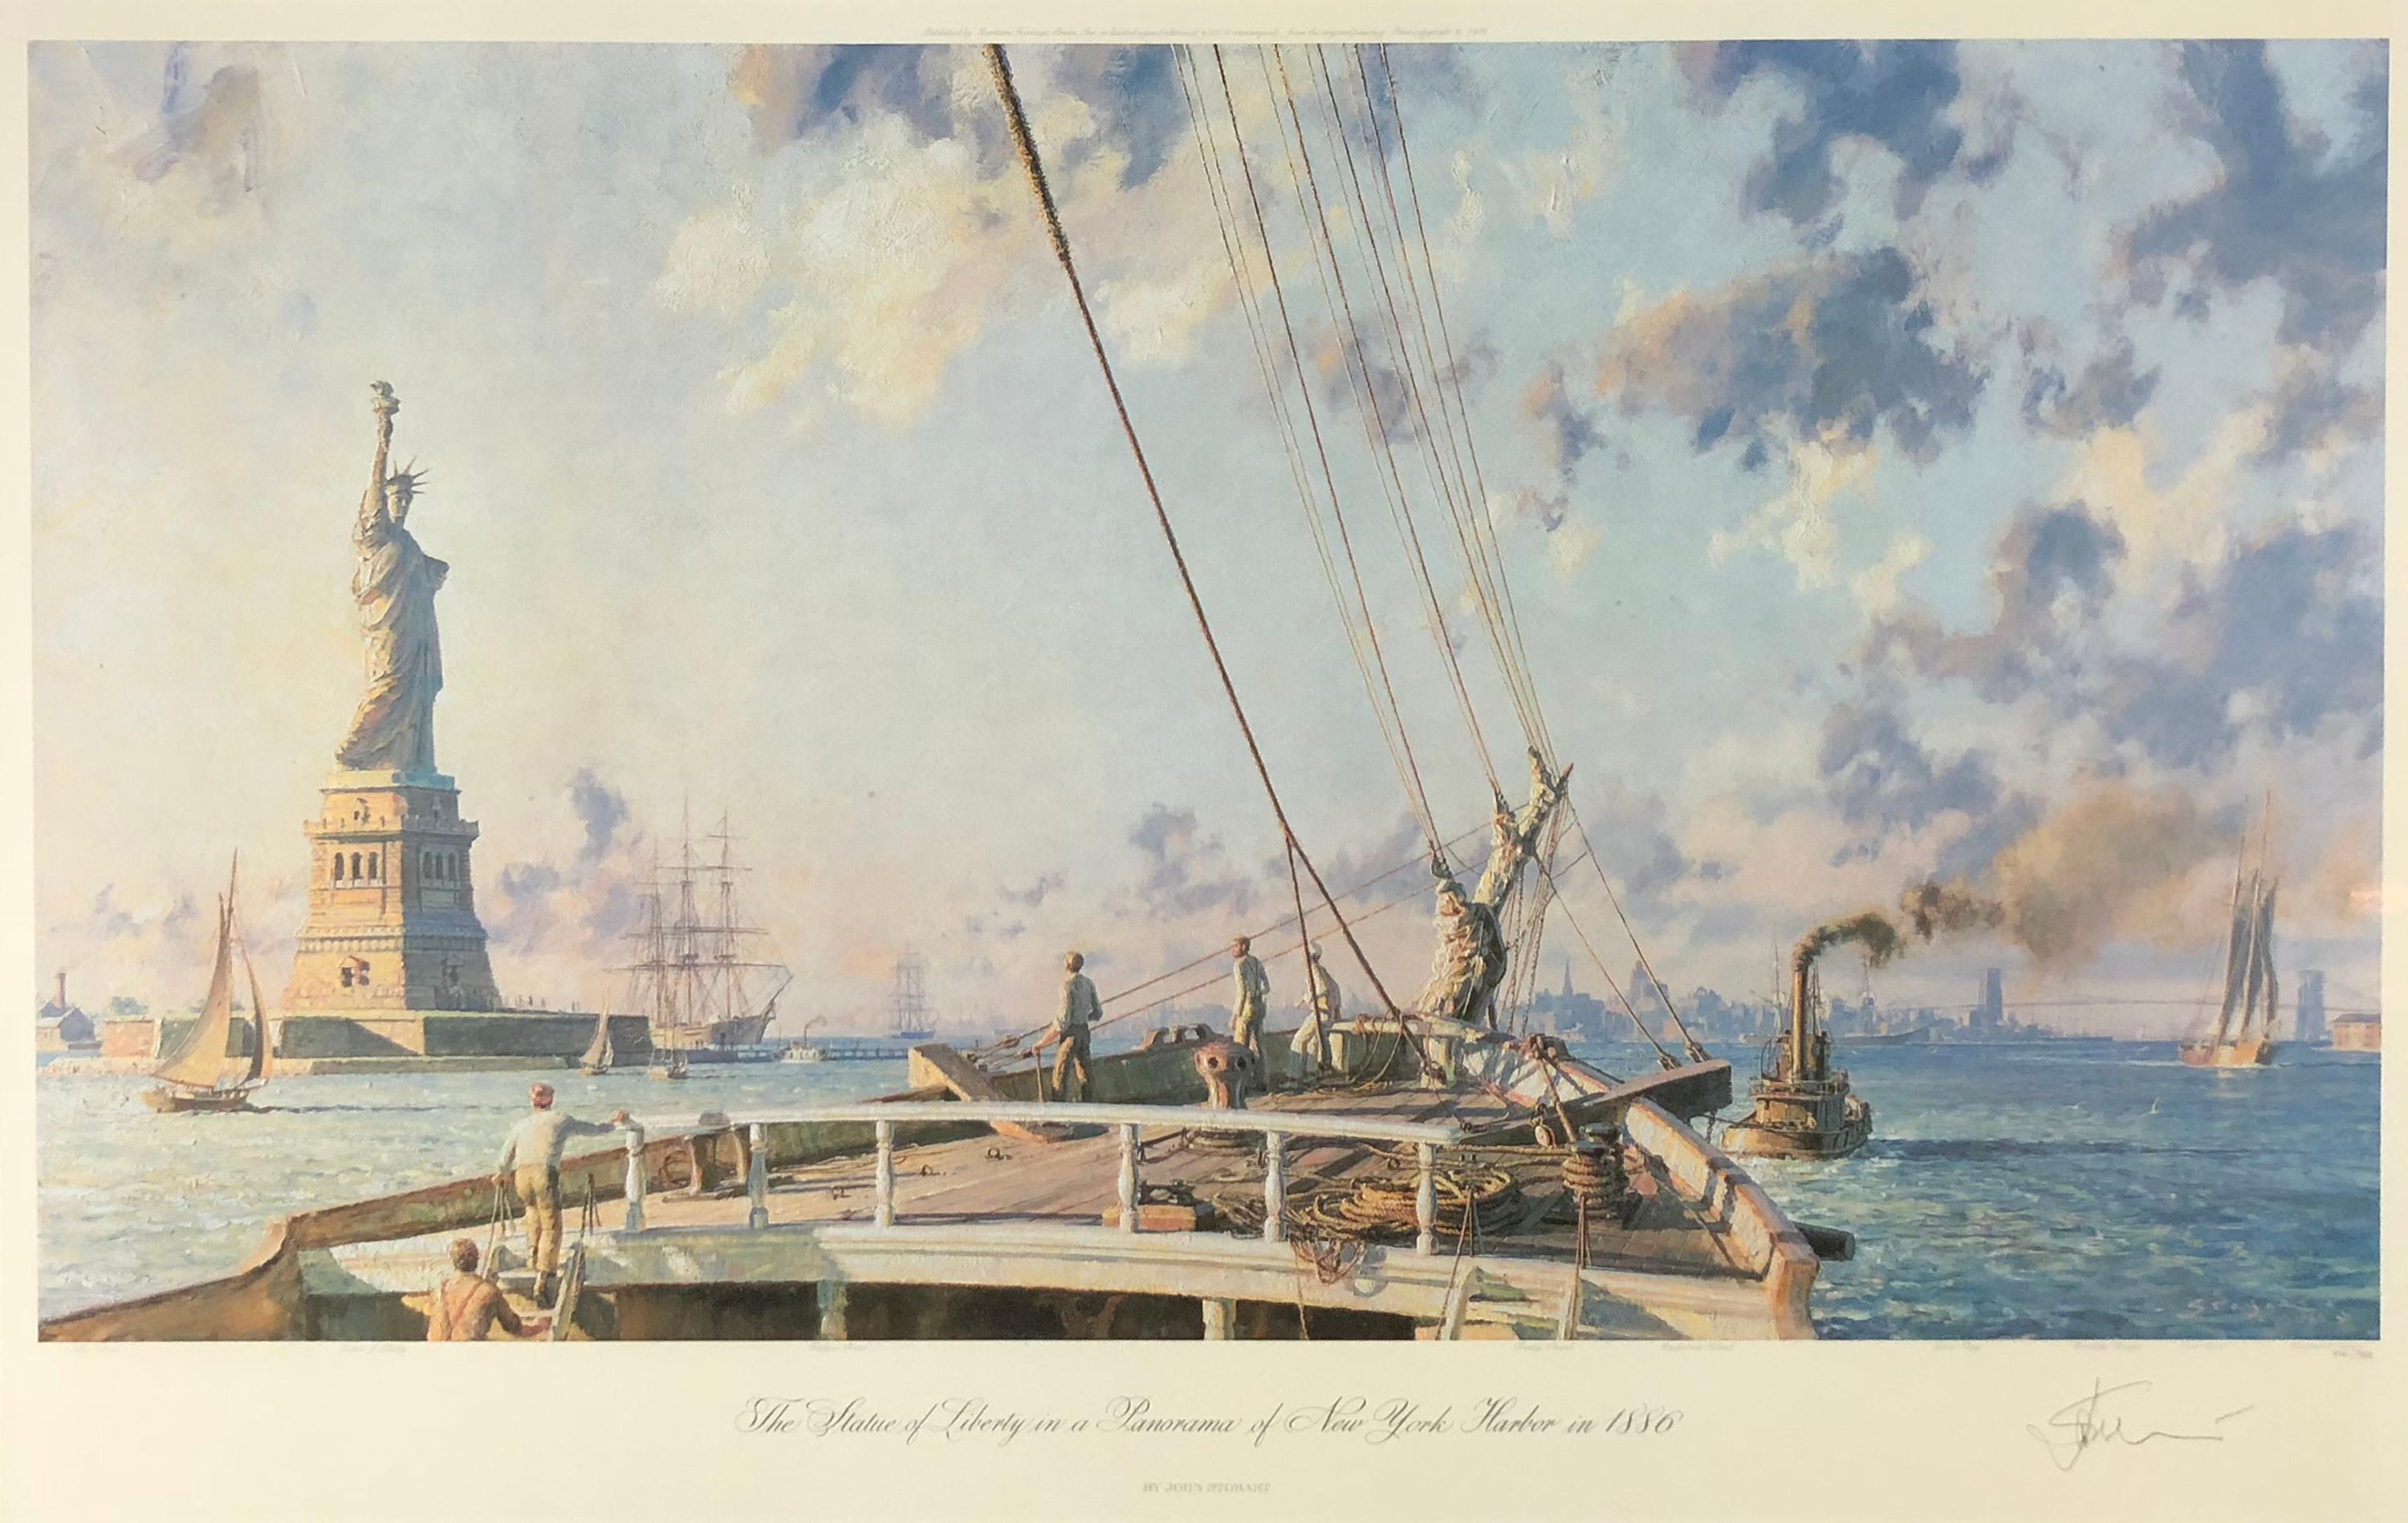 John Stobart Landscape Print - The Statue of Liberty in a Panorama of New York City in 1886